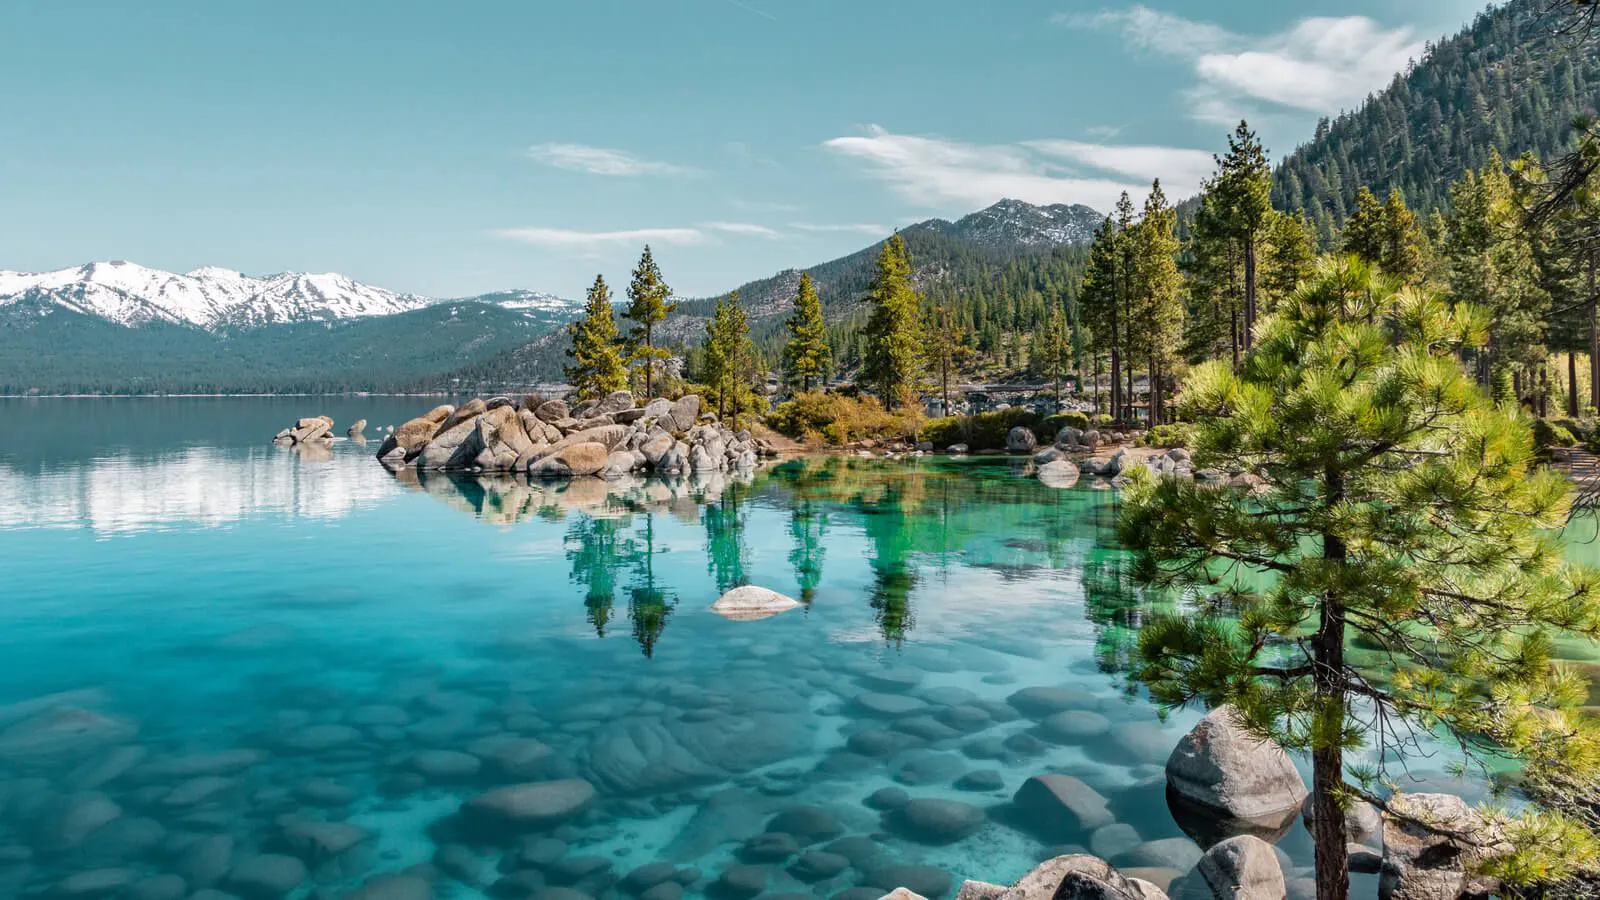 A view of Lake Tahoe with mountains and thick forest along the edge of the clear blue water